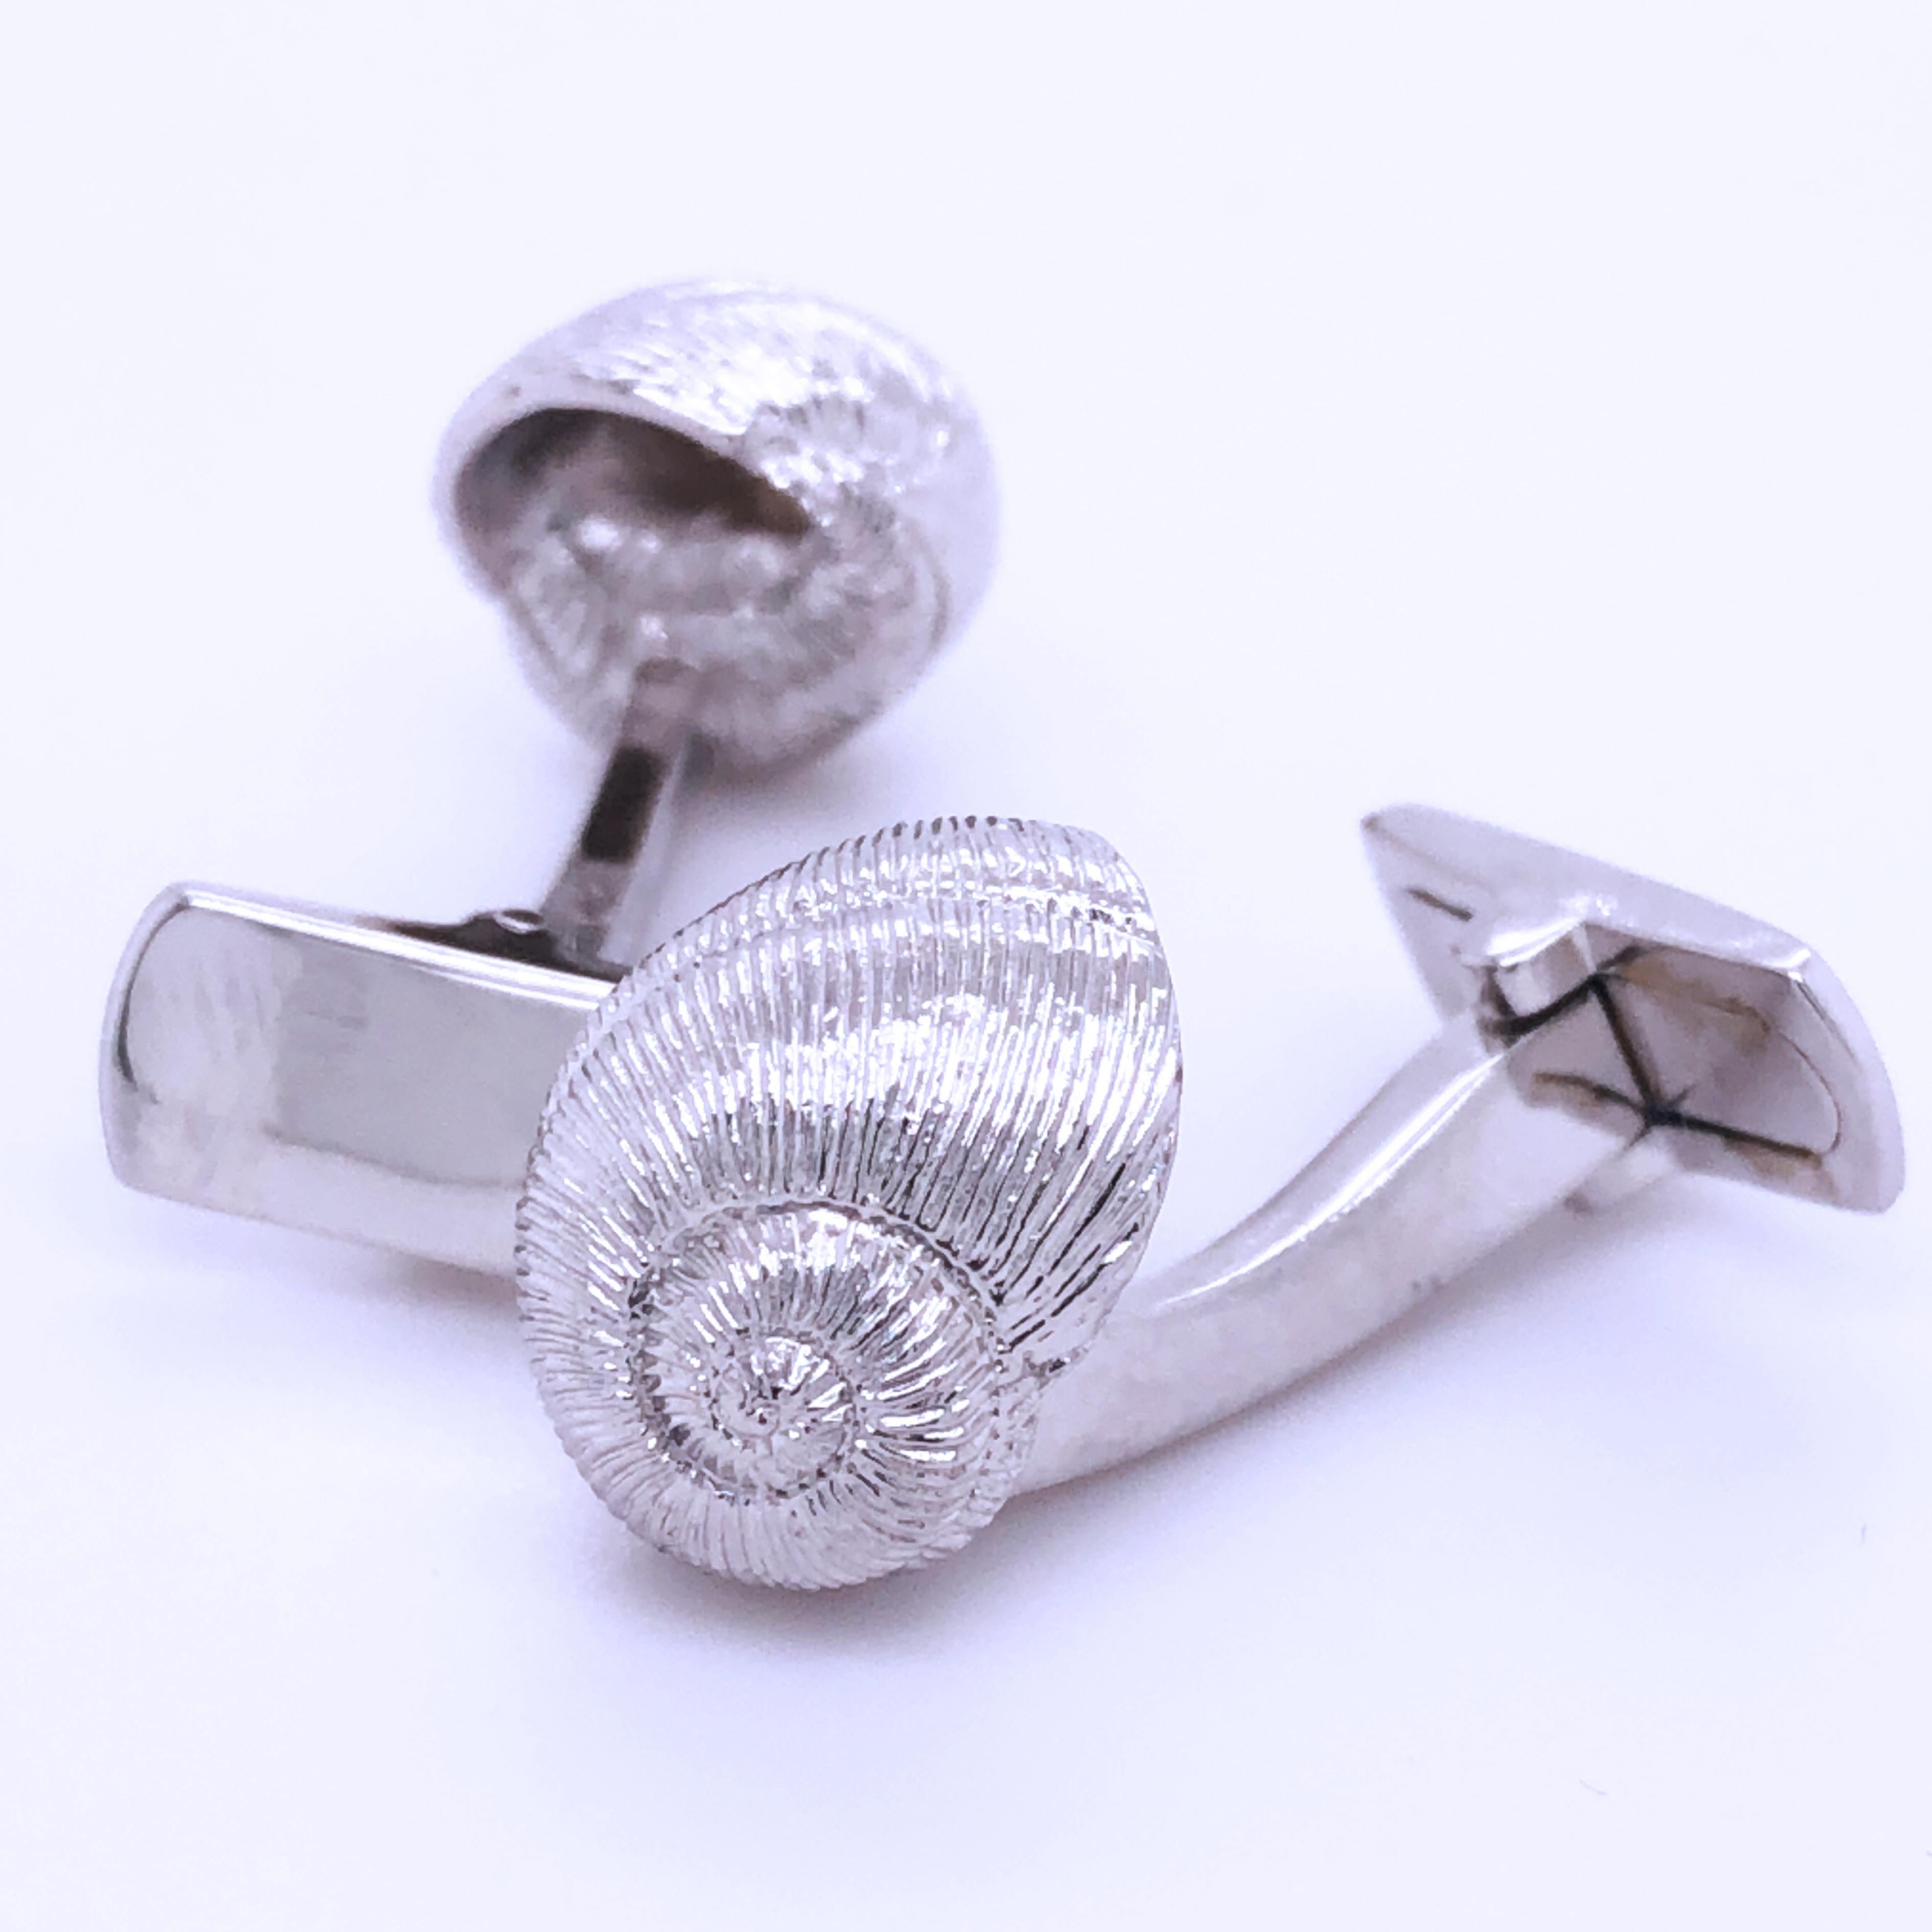 Unique and absolutely Chic, Hand Engraved Seashell Shaped Sterling Silver Cufflinks T-Bar Back.
In our smart black box and pouch.

Shell size about 0.511x0.393 inches
